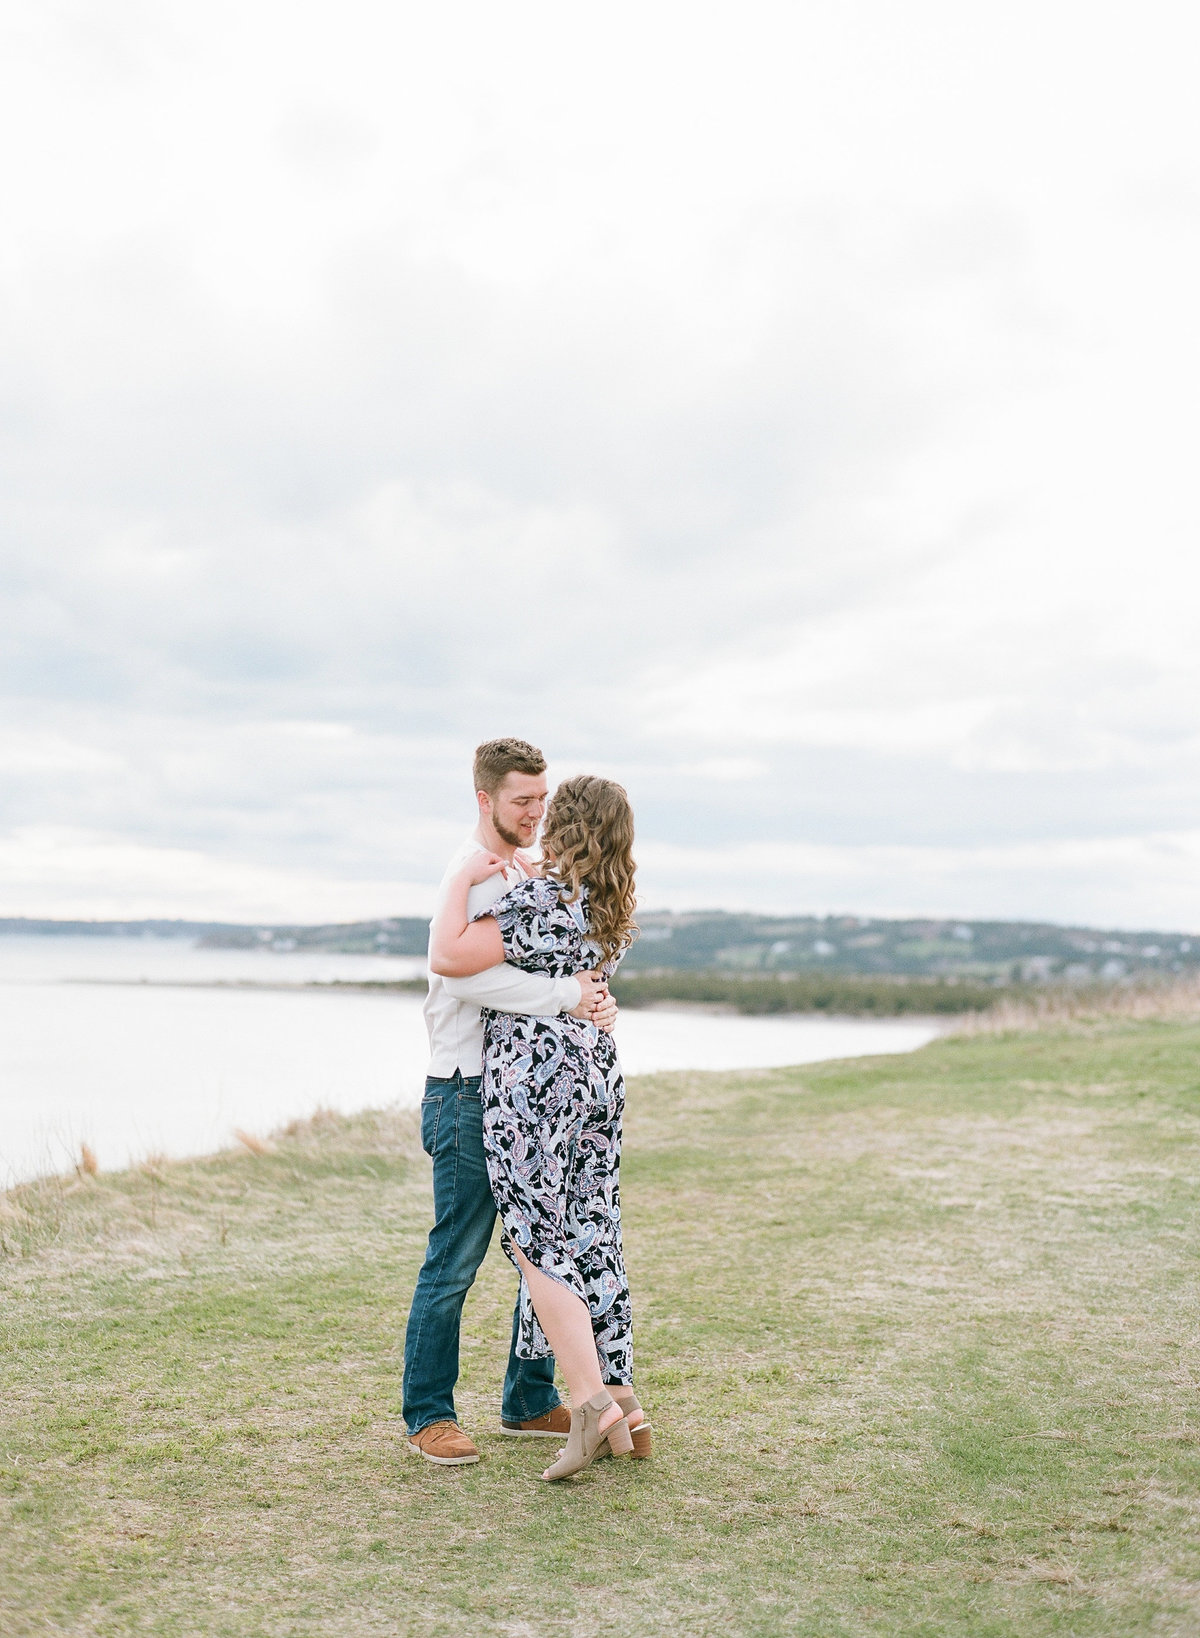 Jacqueline Anne Photography - Akayla and Andrew - Lawrencetown Beach-45